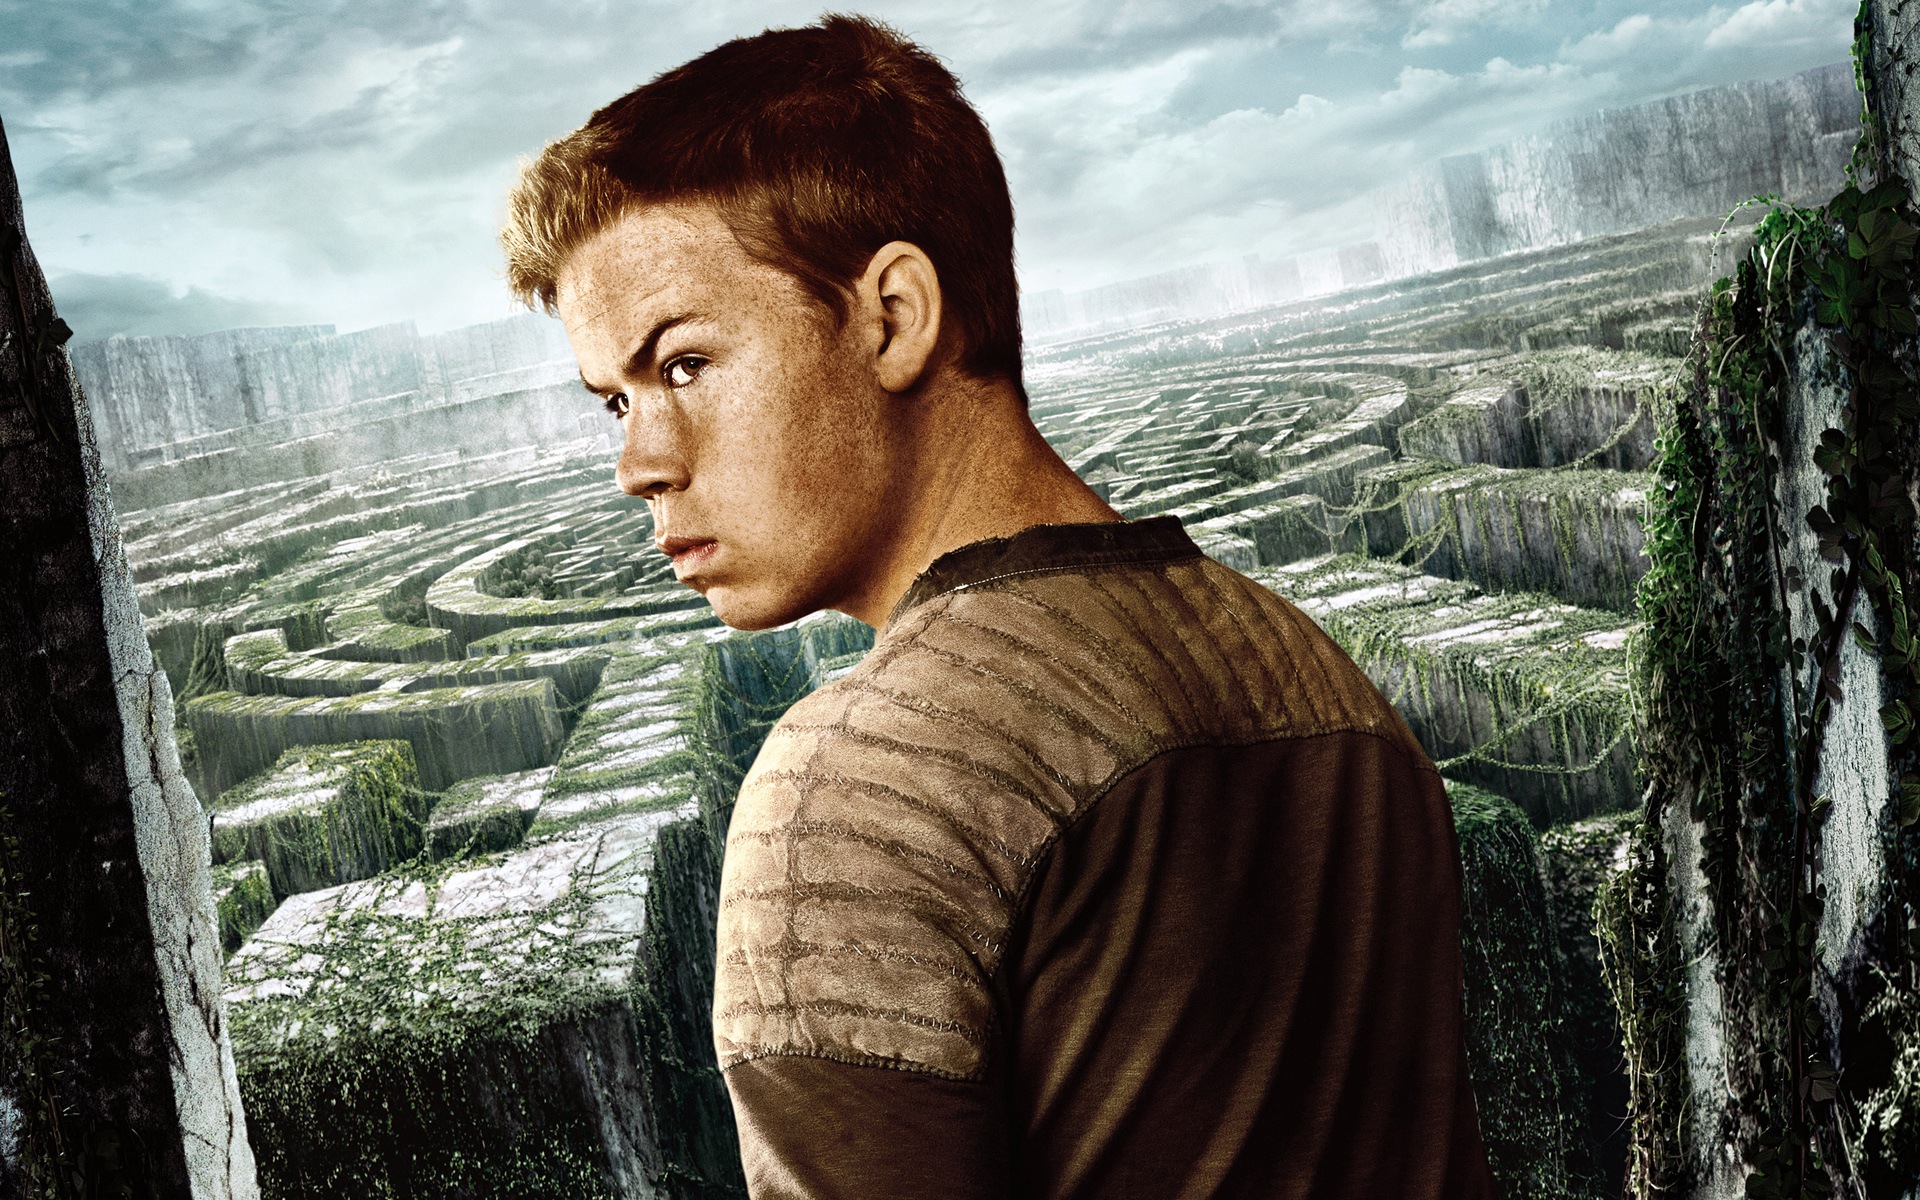 The Maze Runner HD movie wallpapers #11 - 1920x1200